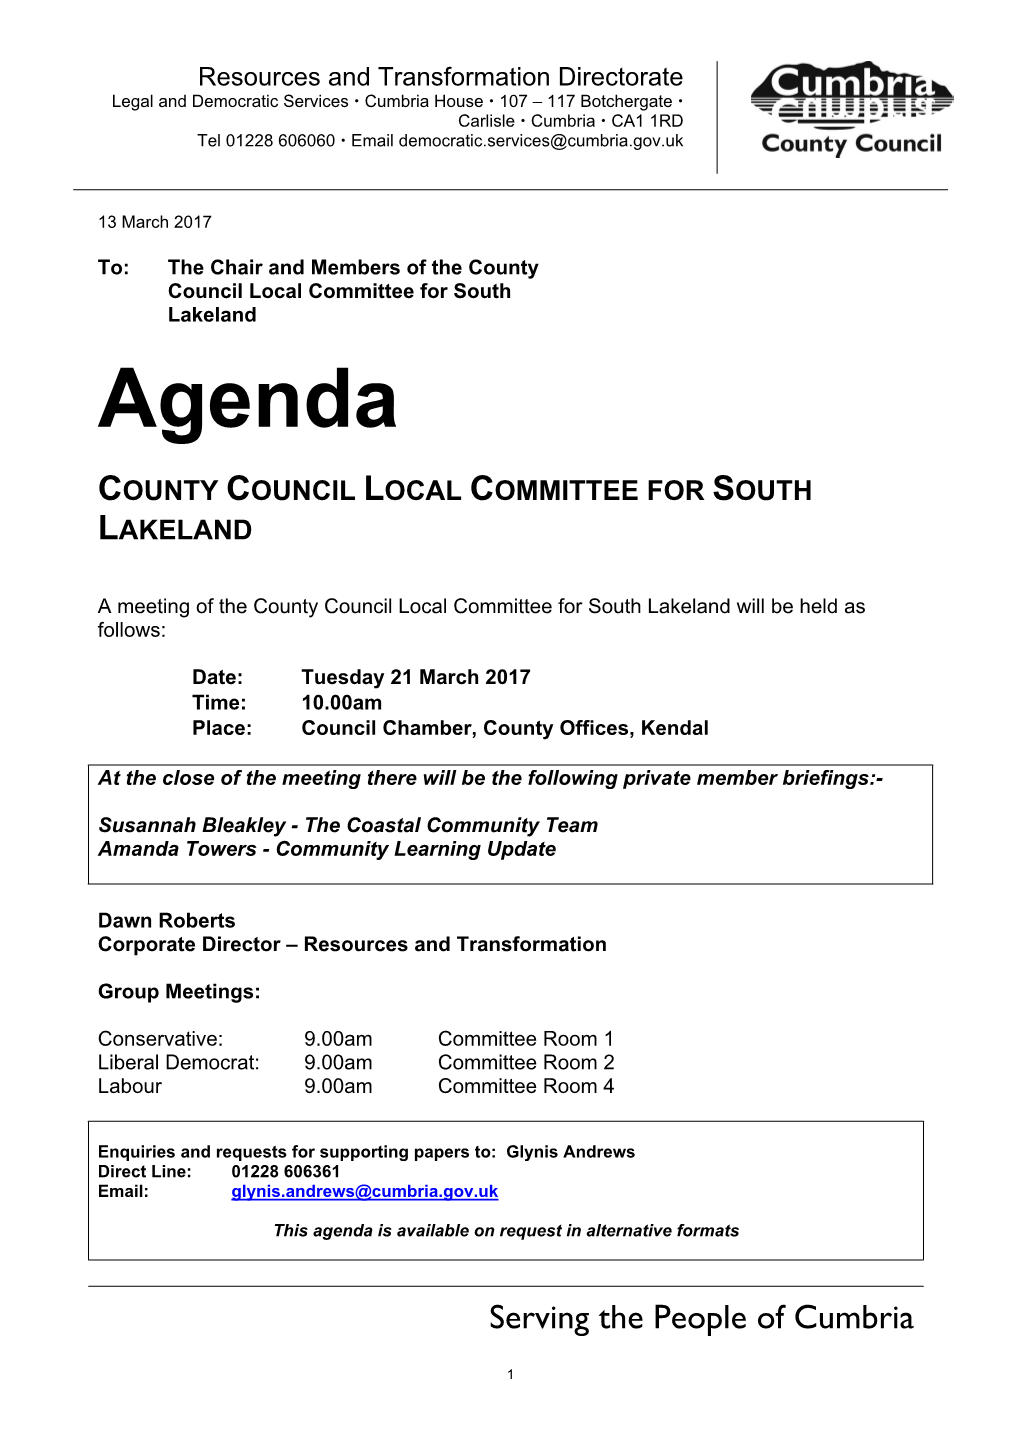 (Public Pack)Agenda Document for County Council Local Committee for South Lakeland, 21/03/2017 10:00